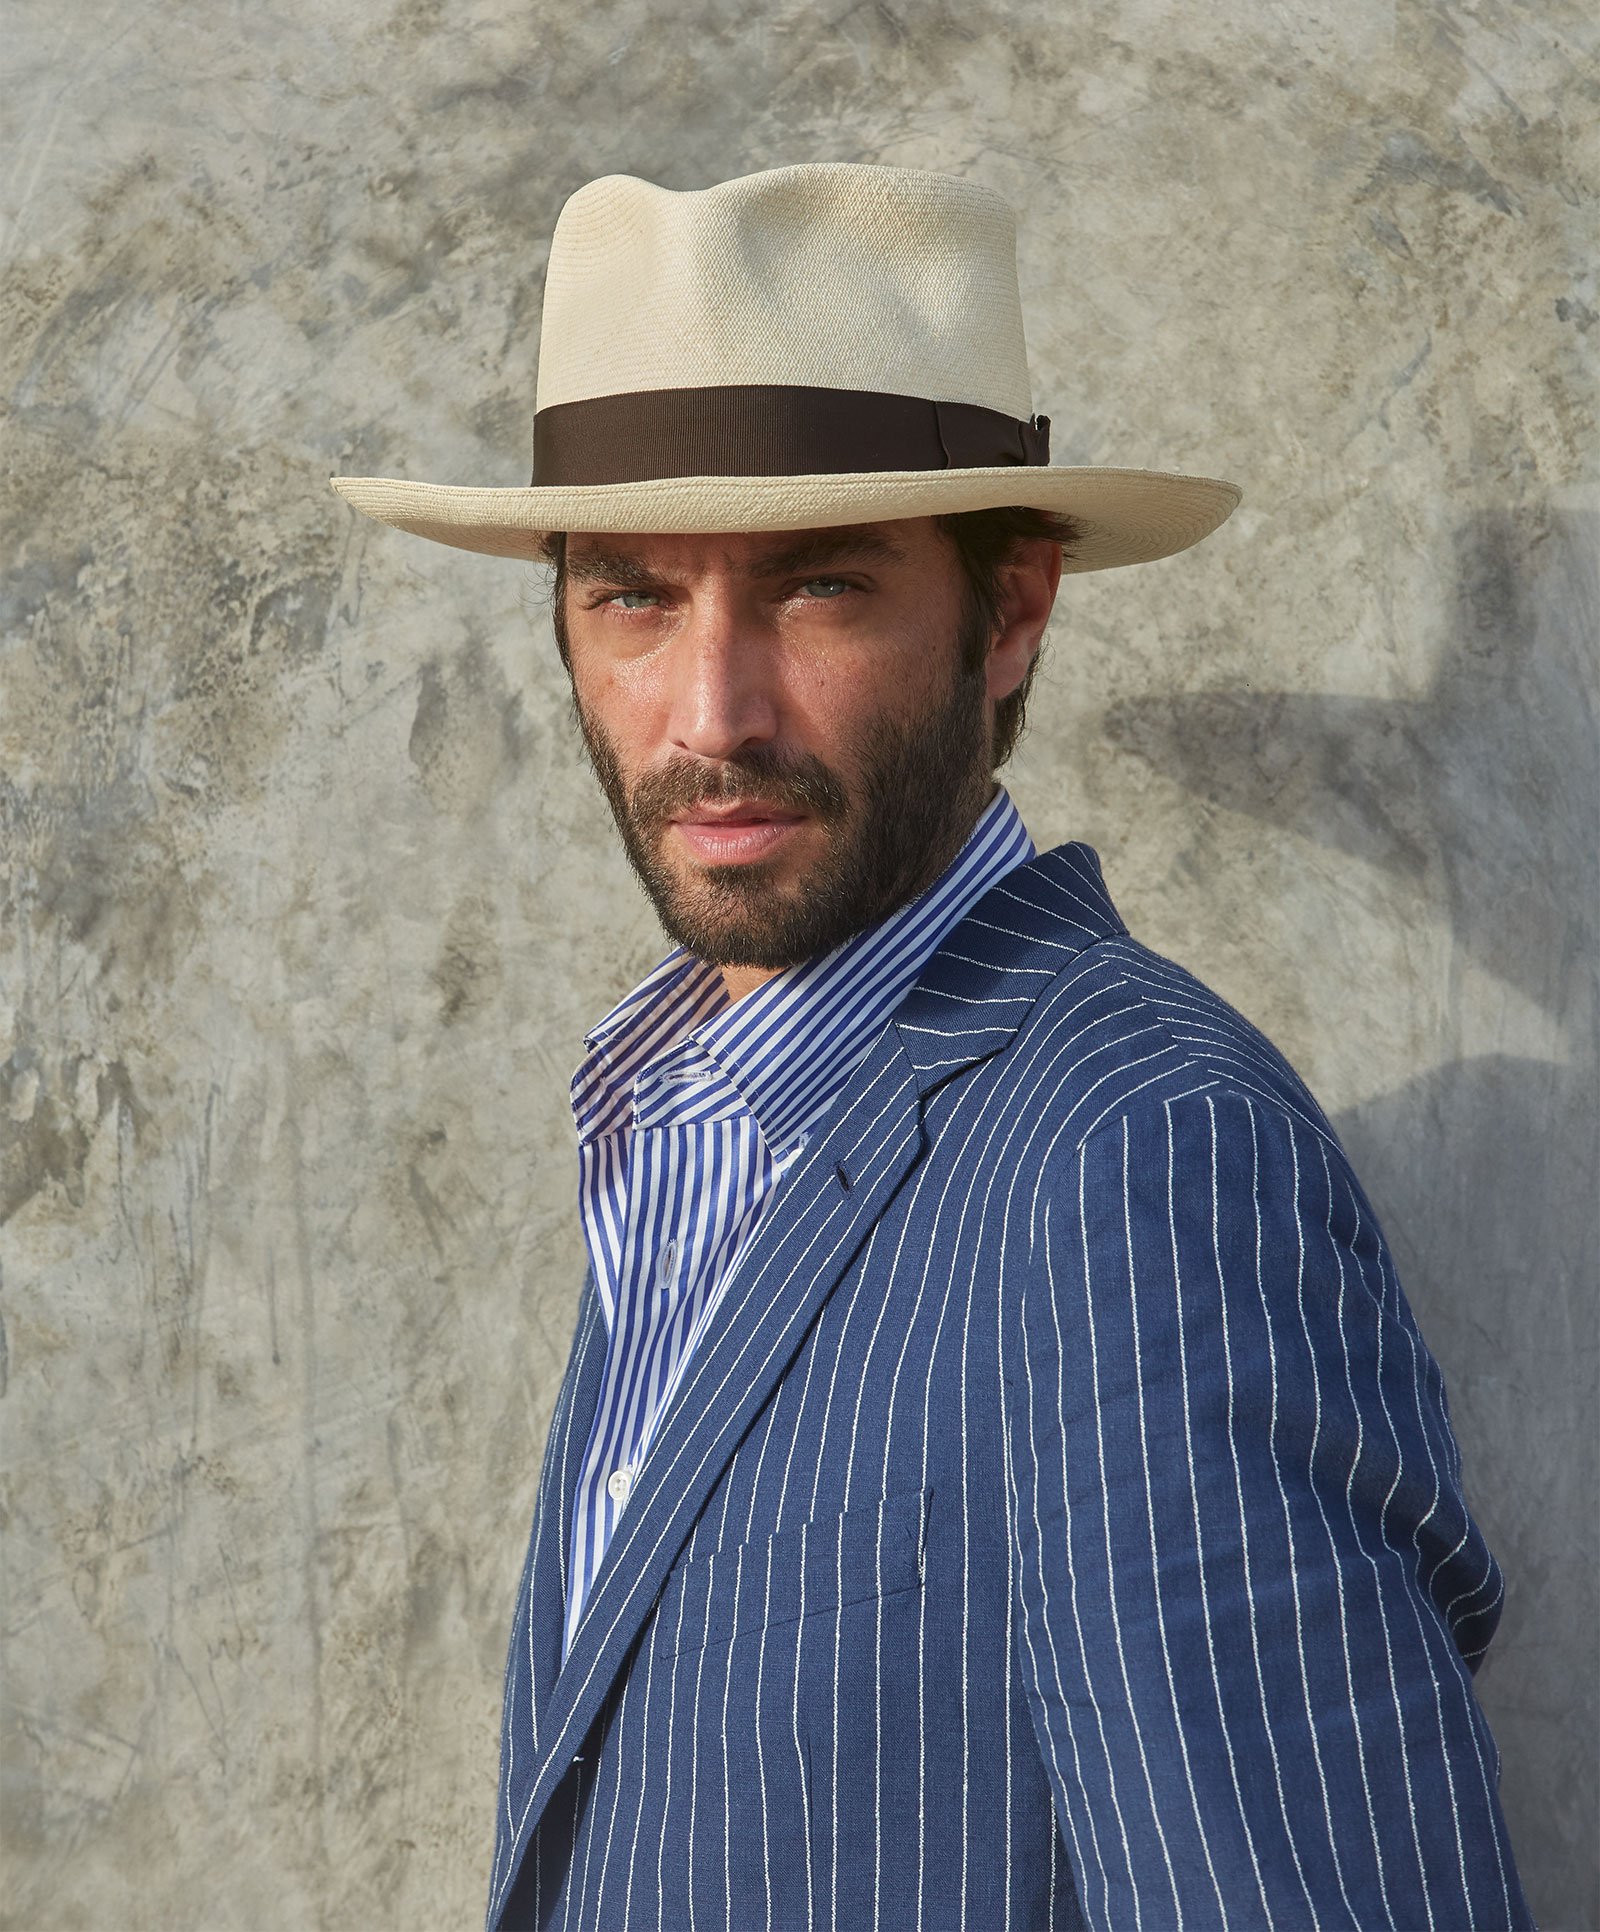 Design
Rarer than a perfect diamond and infinitely more refined, we are proud to carry the most exquisitely crafted Montecristi Panama hats in the world. Depending on the quality of the weave, a Worth & Worth Montecristi Panama Hat can take several months to weave by our master weavers in Ecuador. Available in four different qualities, the result is a hat with a soft texture, translucent appearance, and luminous ivory color. 
Material
Our Montecristi Panama straw is handwoven in Ecuador and available in 4 different qualities: Artisan, Master, Museum, and Superfino.
Specifications
With its teardrop Style, our Montecristi Casablanca combines a 3 3/4” to a 4 crown (depending on your head size) with a 2 3/4 to a 3 1/8 brim and weather refined Hatband. The larger brim offers ample shade for the next time you find yourself headed to the Tropics. Handwoven by our master weavers in Ecuador Handcrafted in New York Truly a work of art.